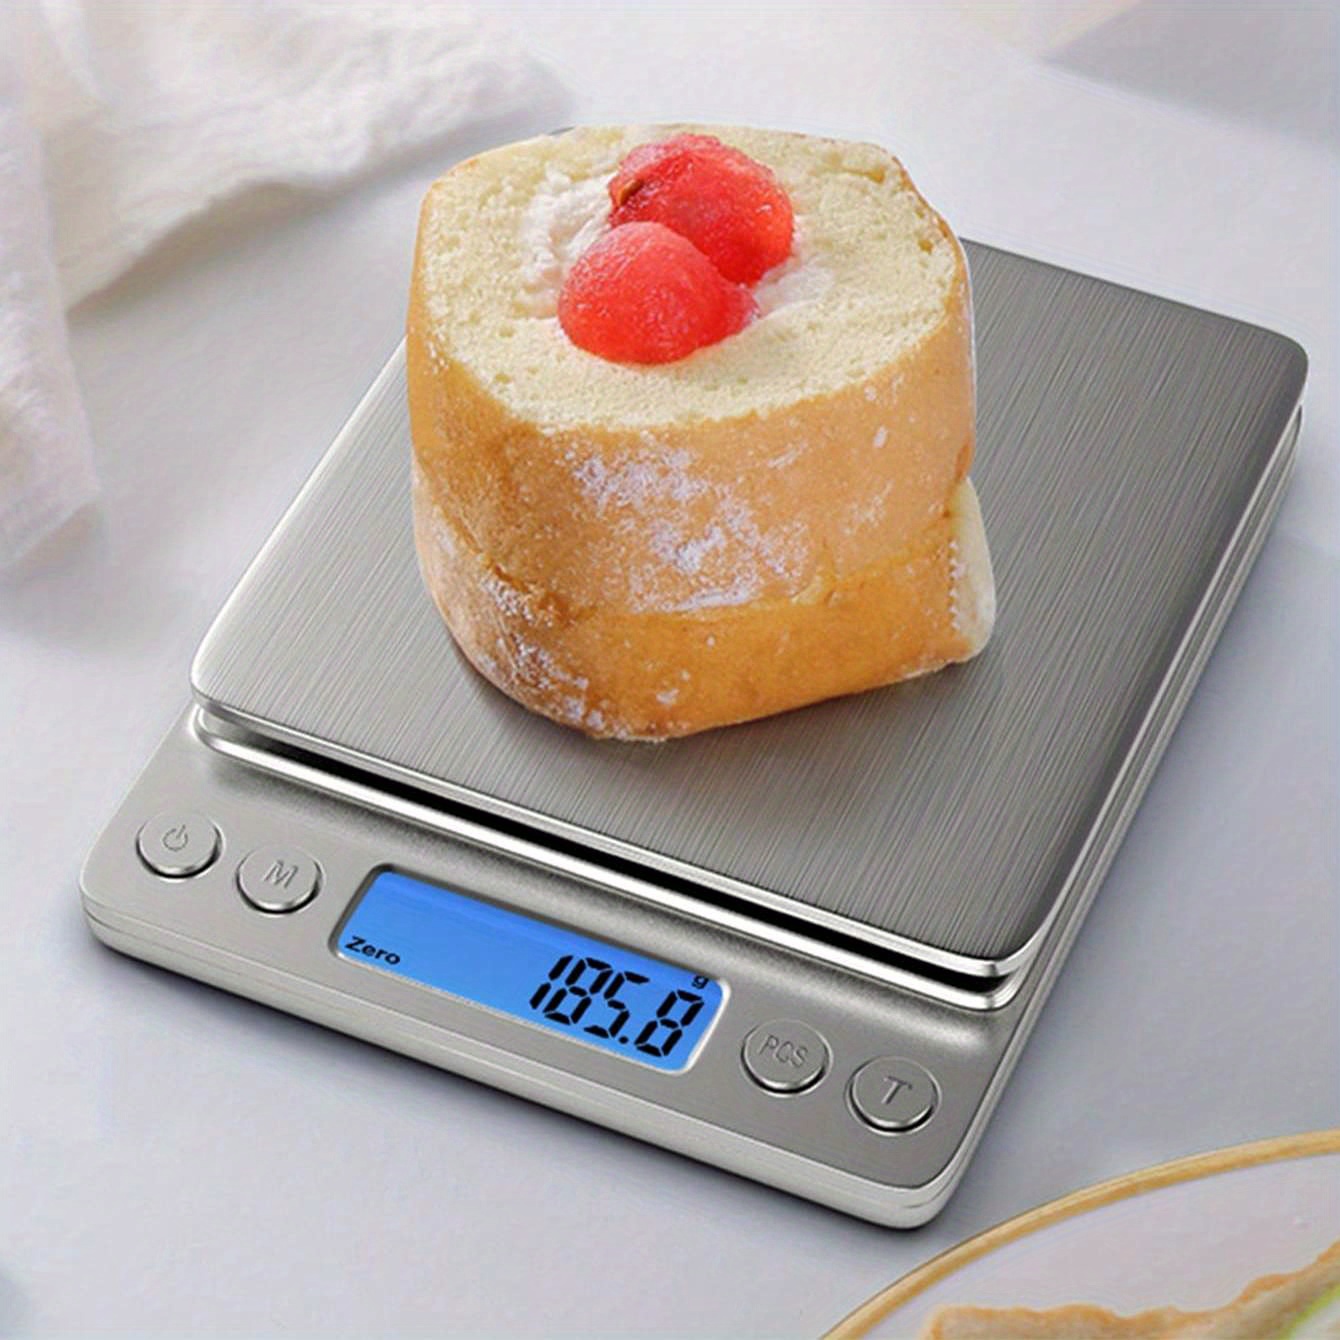 1pc Food scales, digital kitchen scales for food ounces and grams